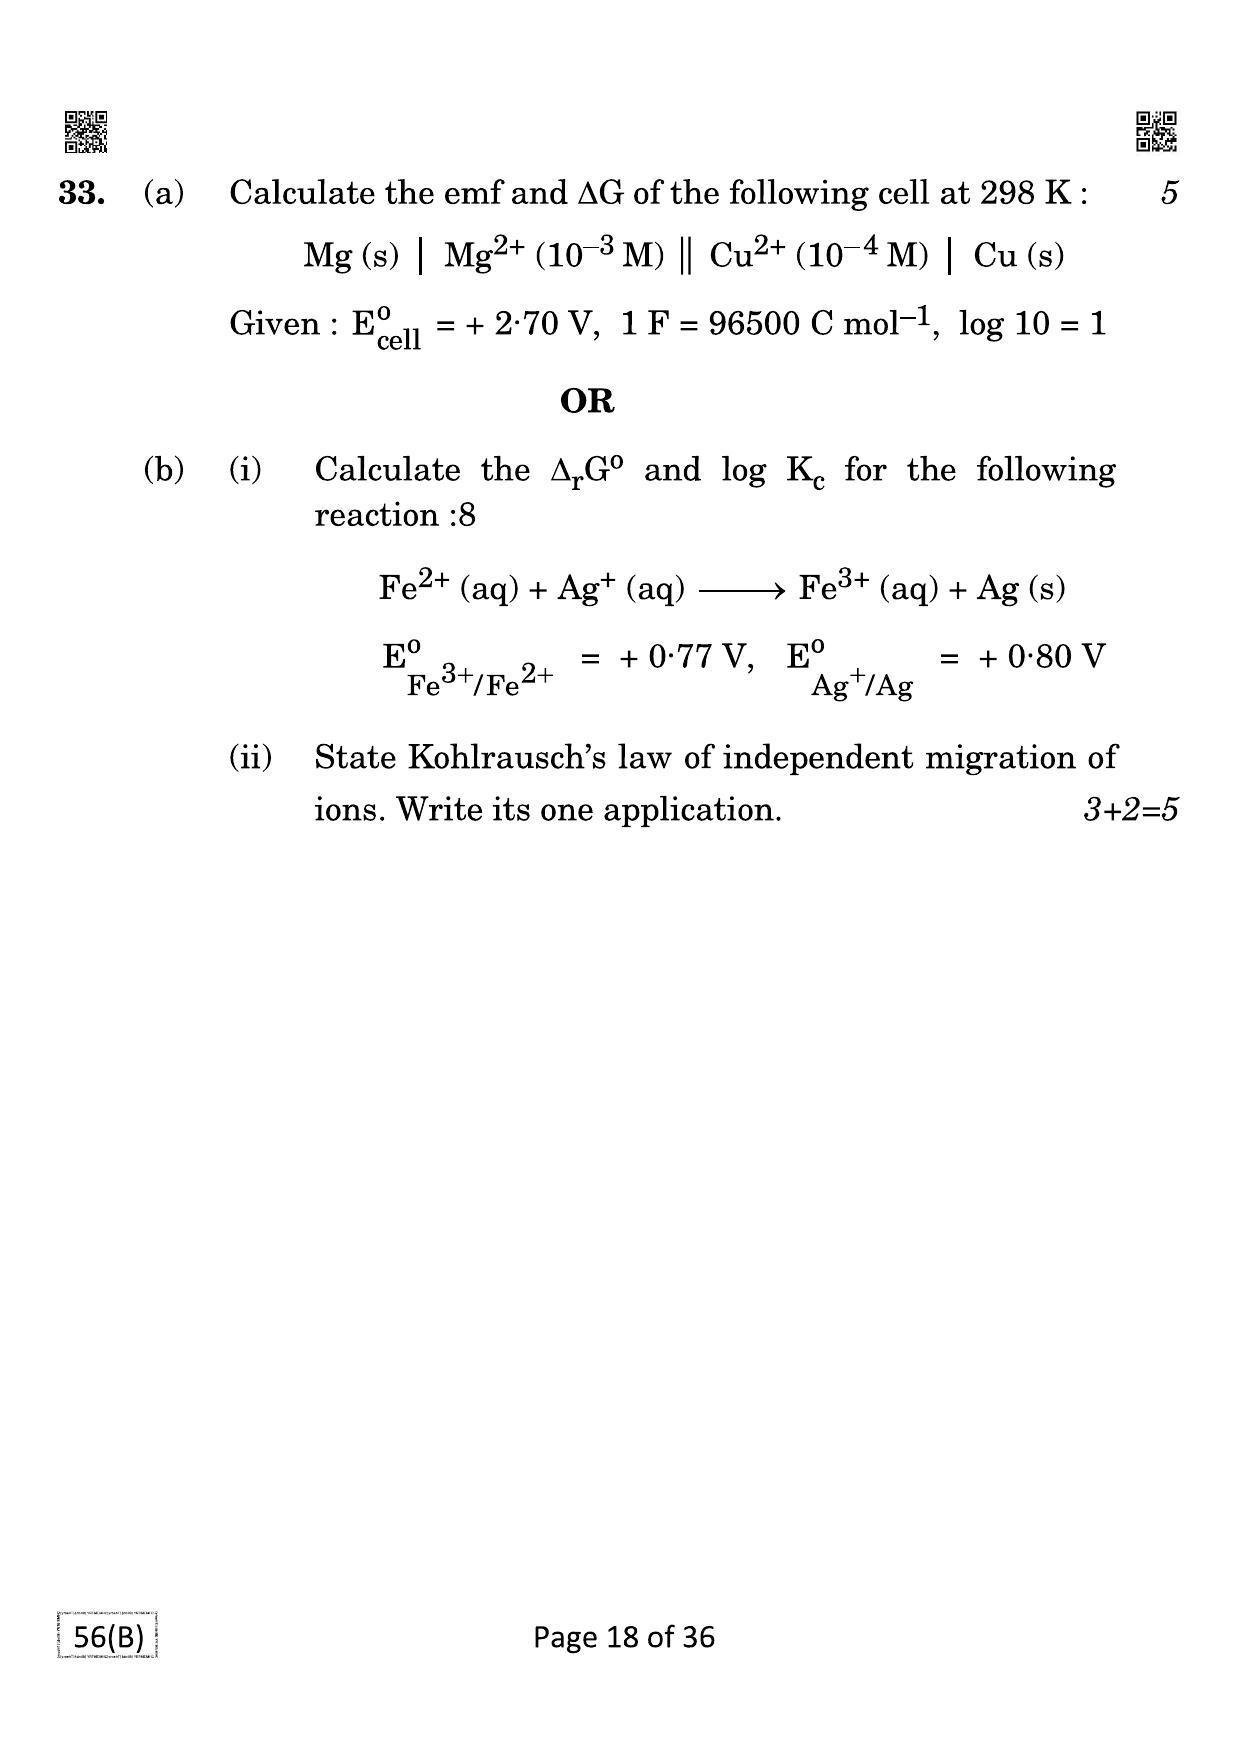 CBSE Class 12 QP_043_CHEMISTRY_FOR_BLIND_CANDIDATES 2021 Compartment Question Paper - Page 18